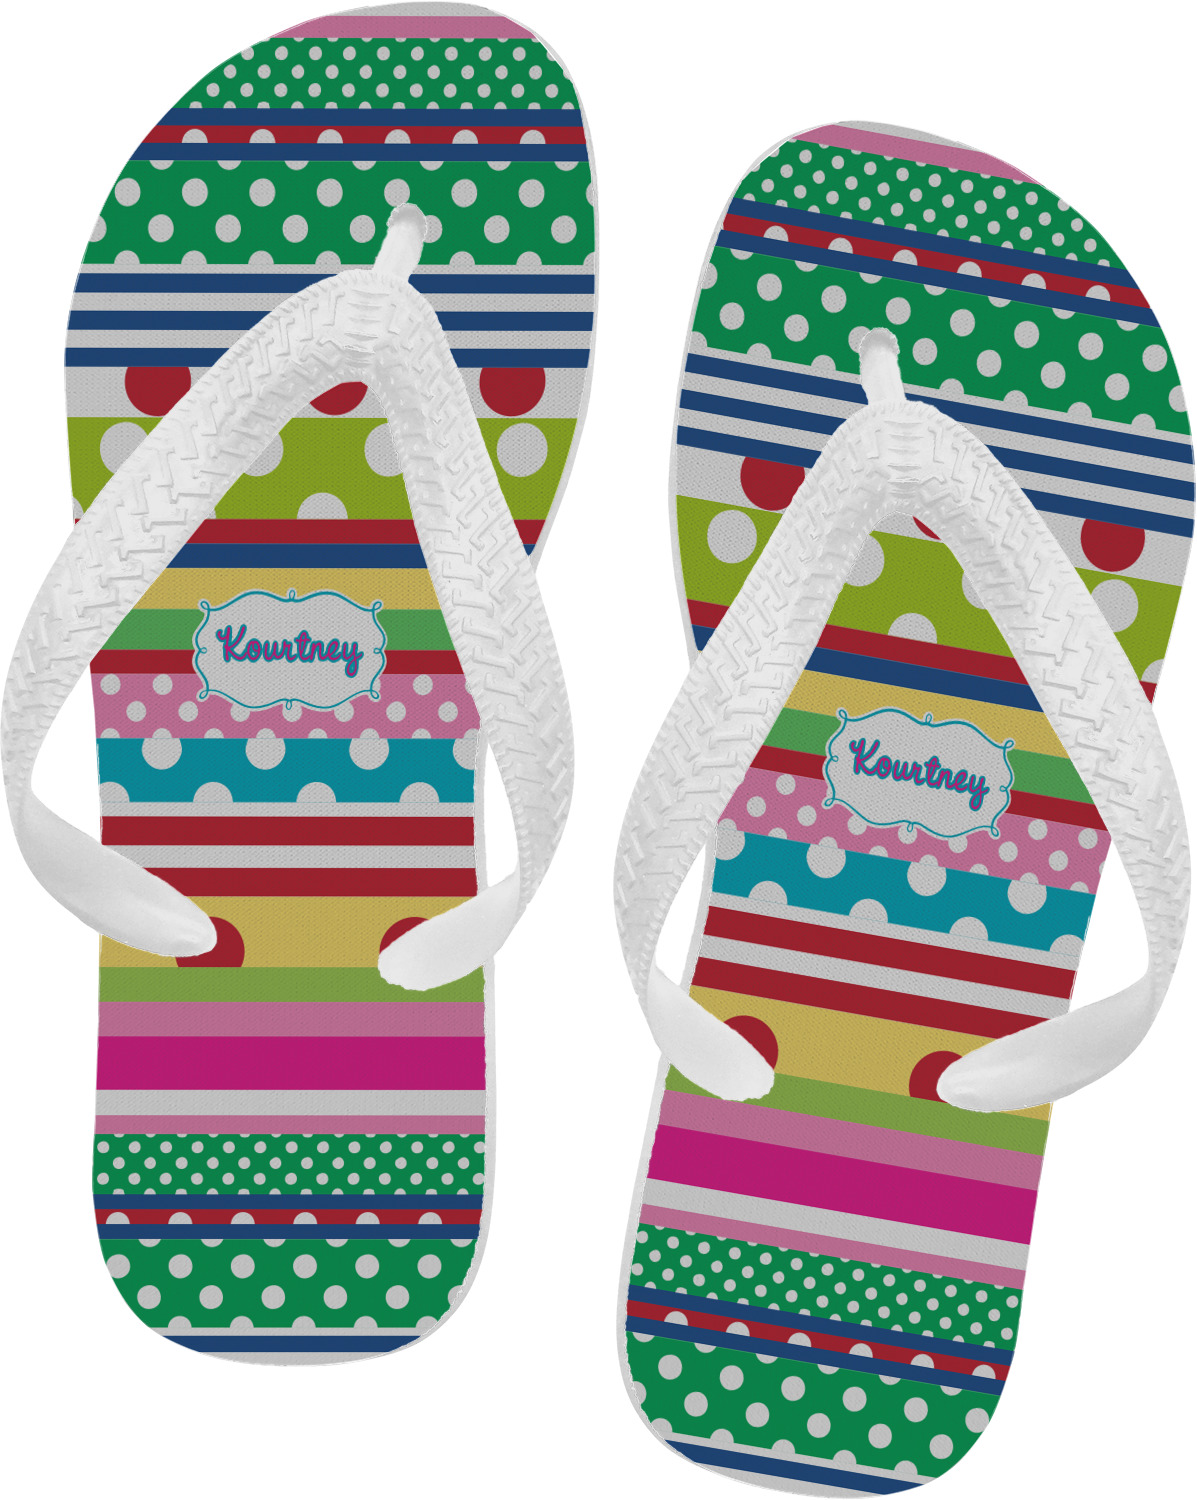 Ribbons Flip Flops (Personalized) - YouCustomizeIt